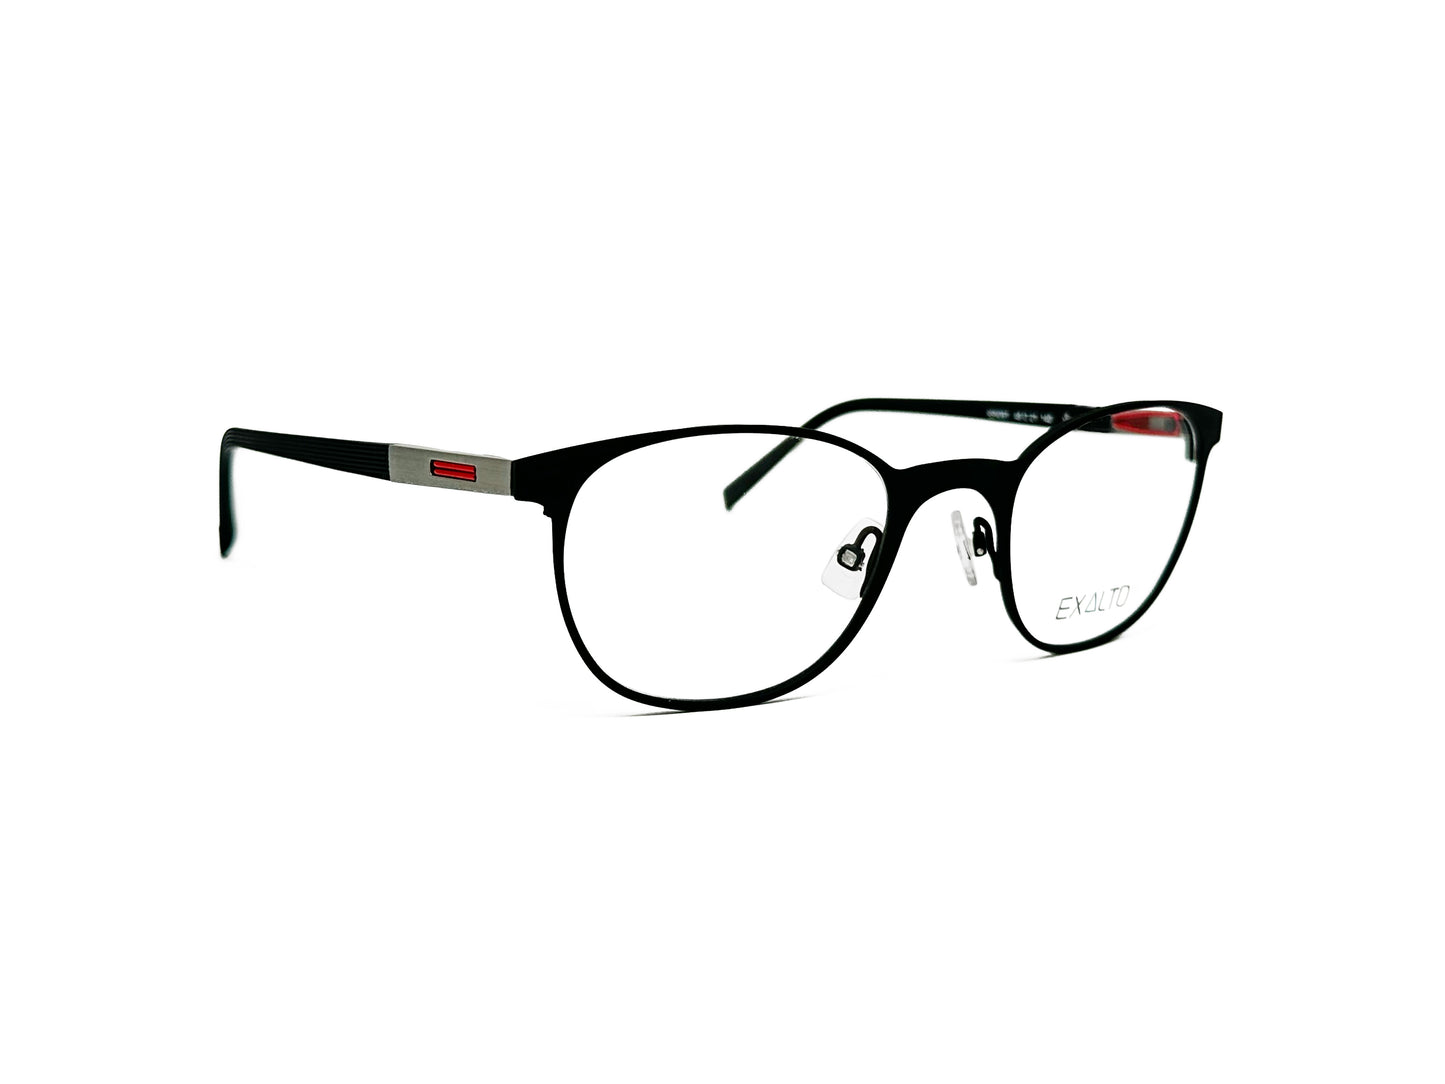 Exalto rounded-square, metal, optical frame. Model: 65N061. Color: Black/Titanium with red stripe. Side view.